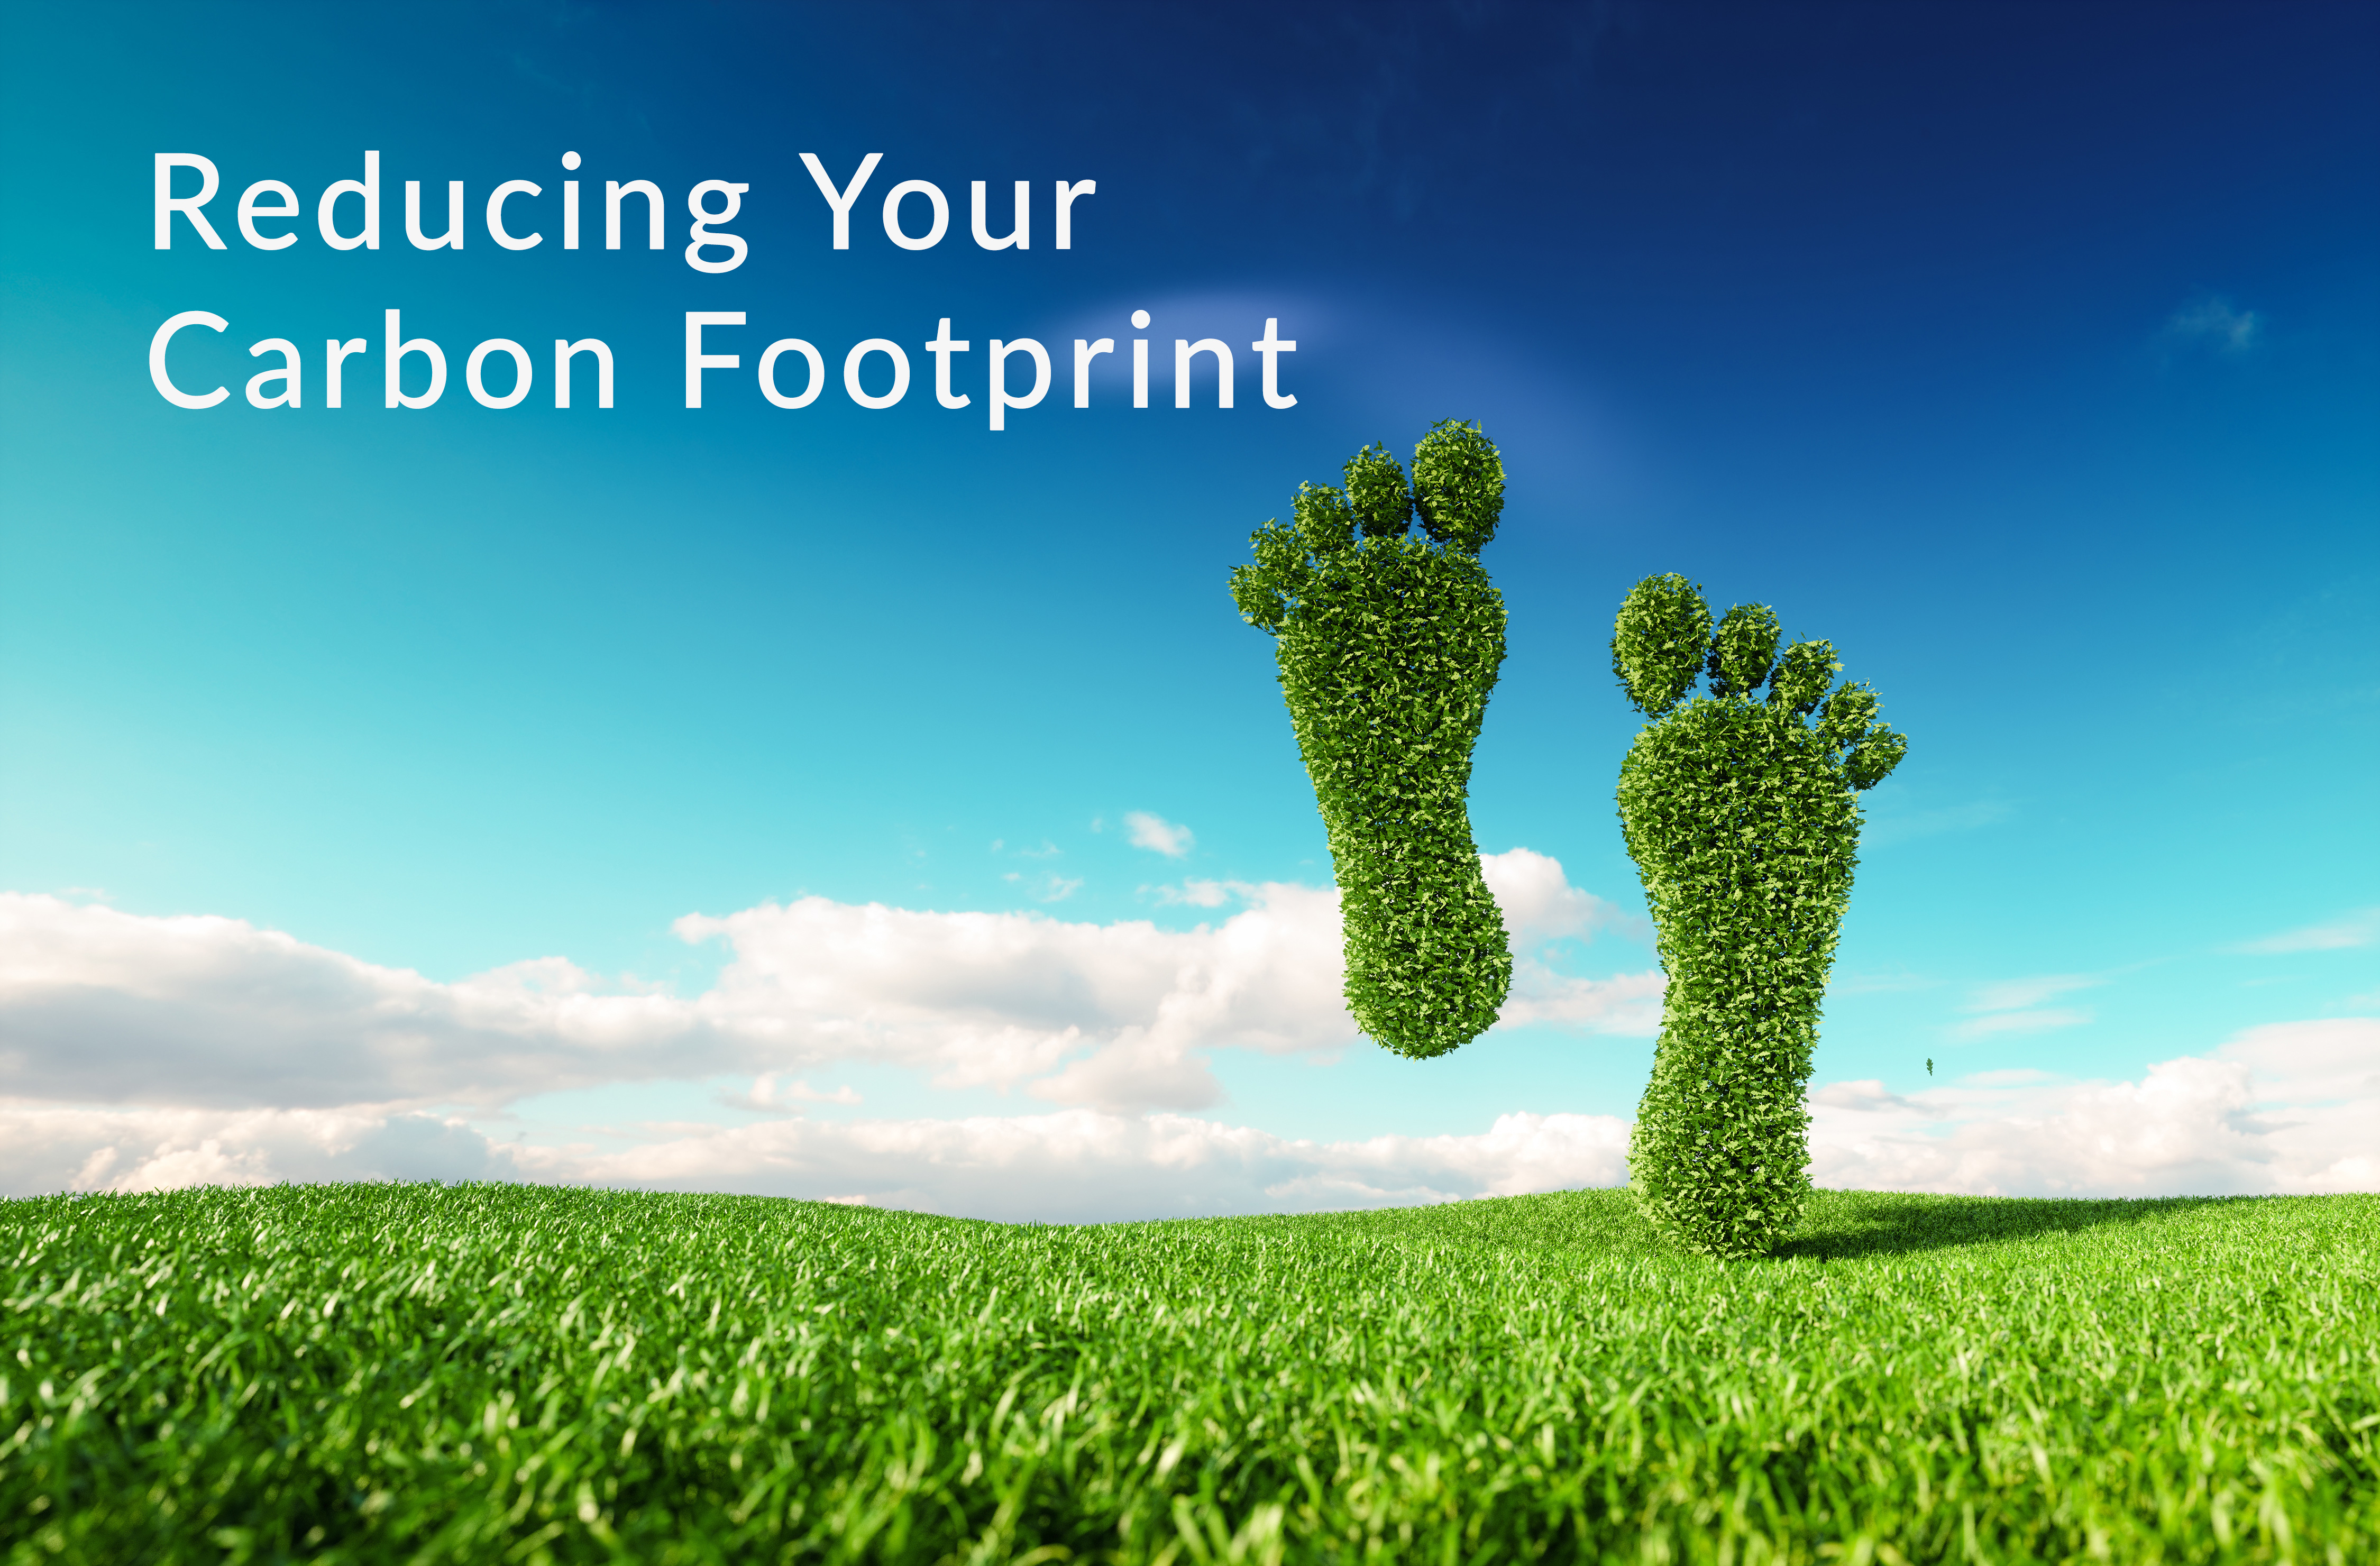 3 Ways to Reduce Your Carbon Footprint and the Benefits